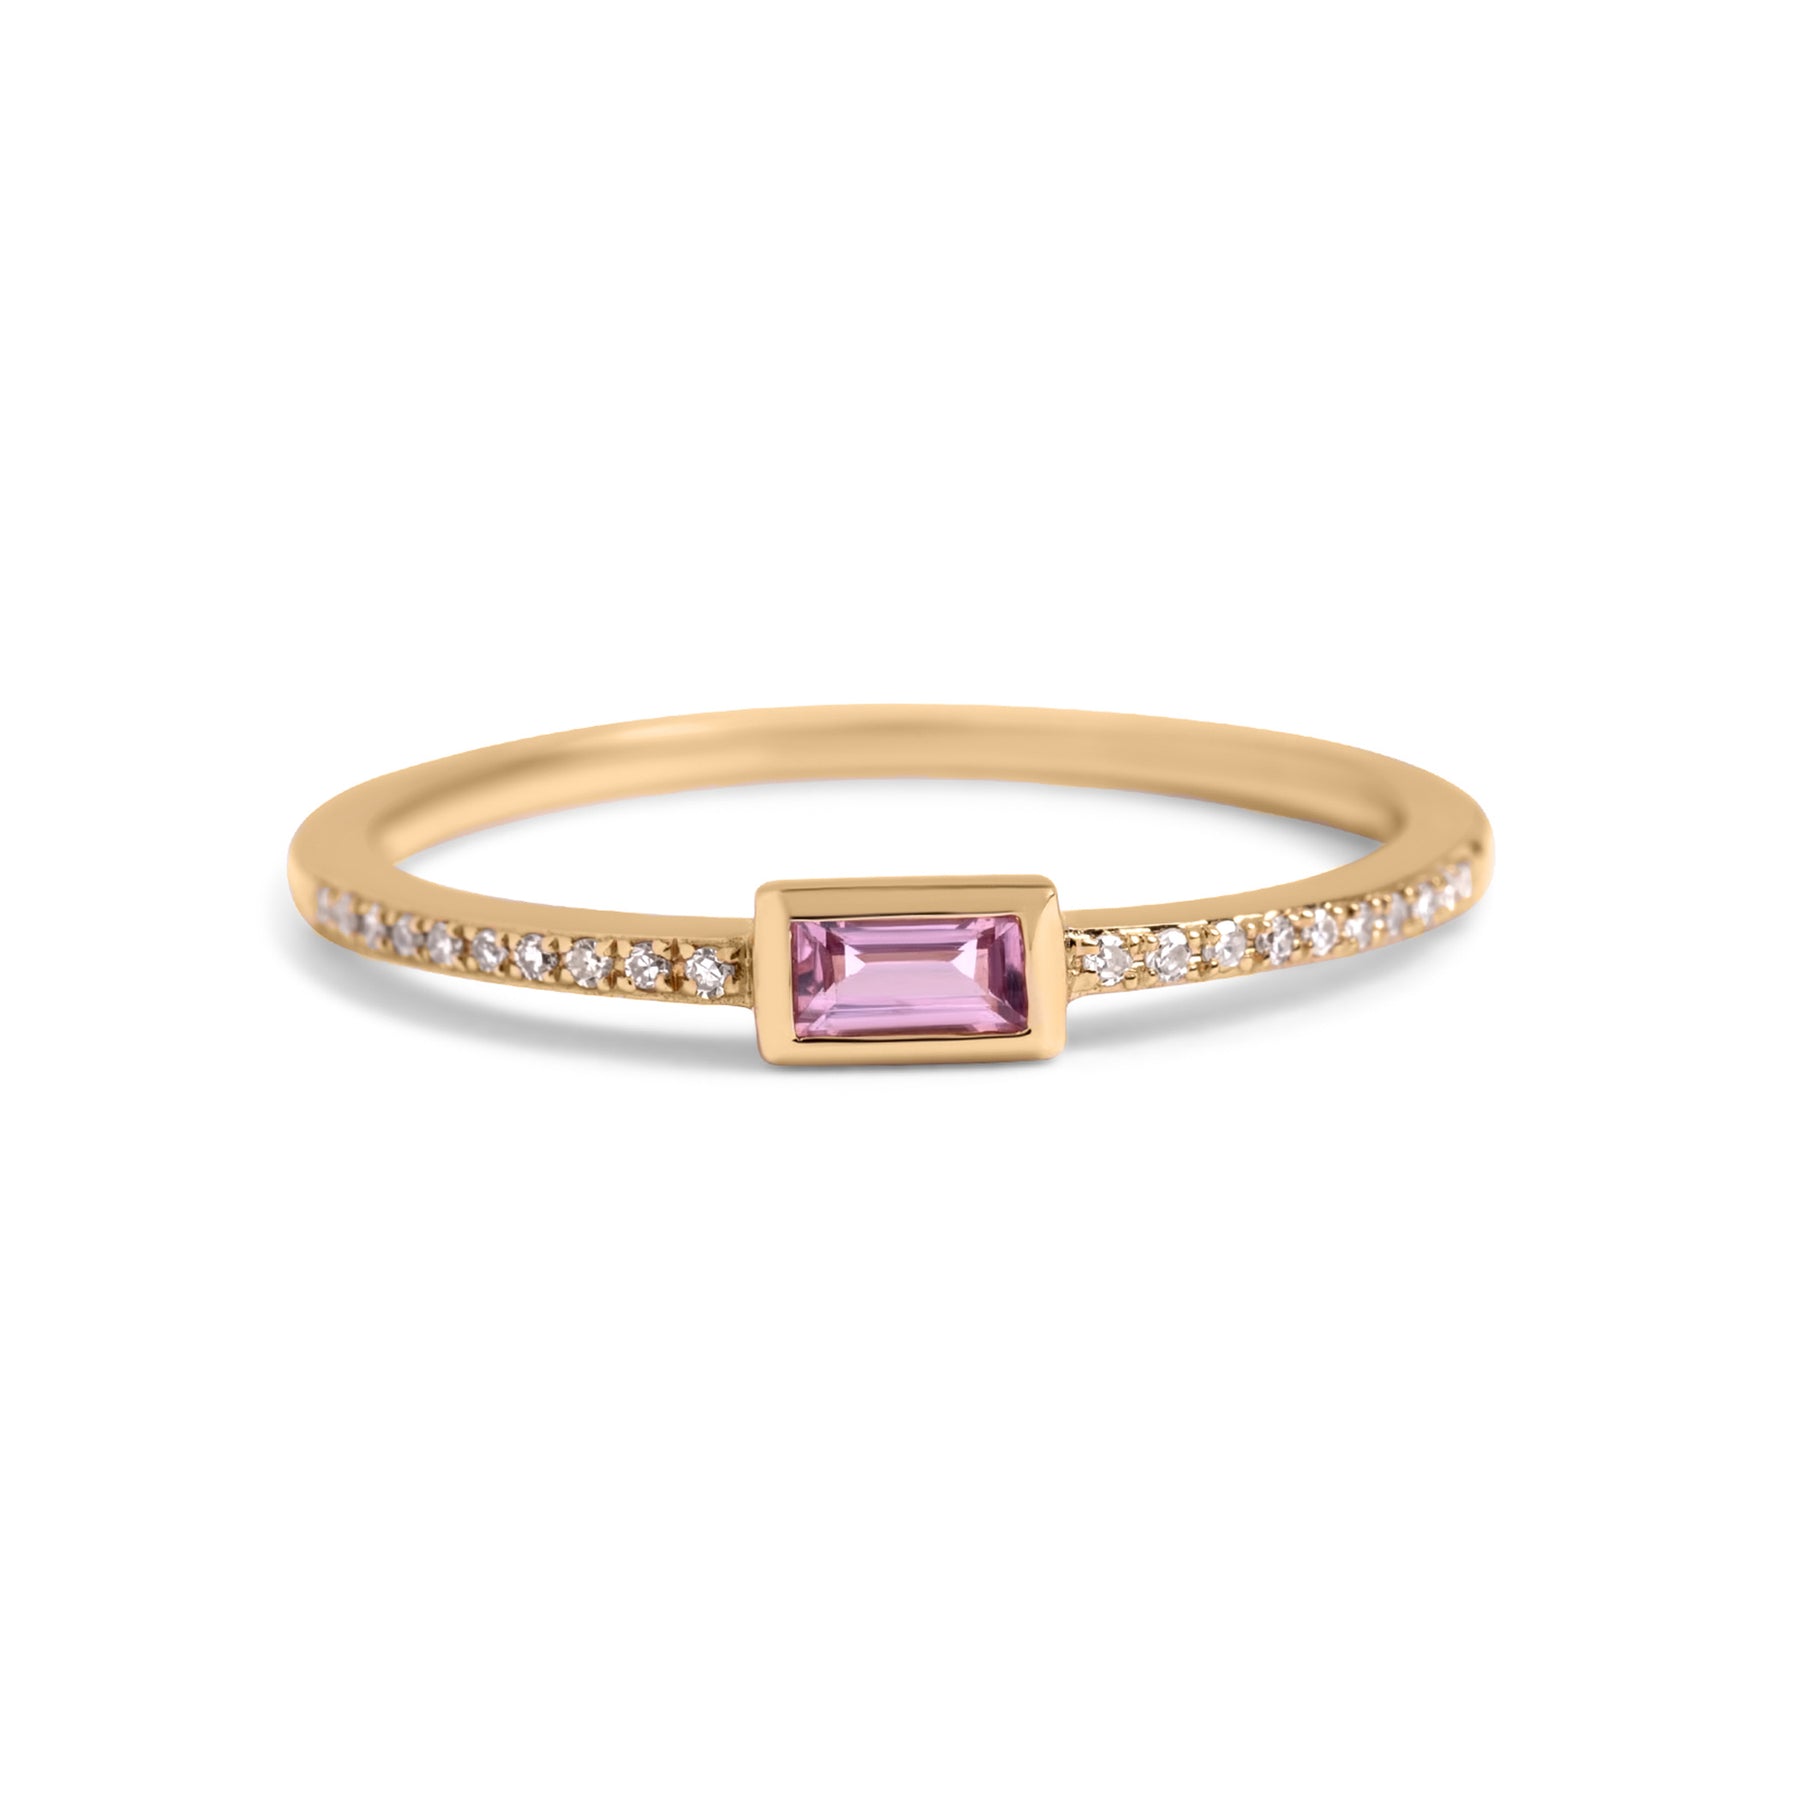 14k yellow or rose gold stacking ring with diamonds on the band and a bezel set pink sapphire, ruby, or blue sapphire